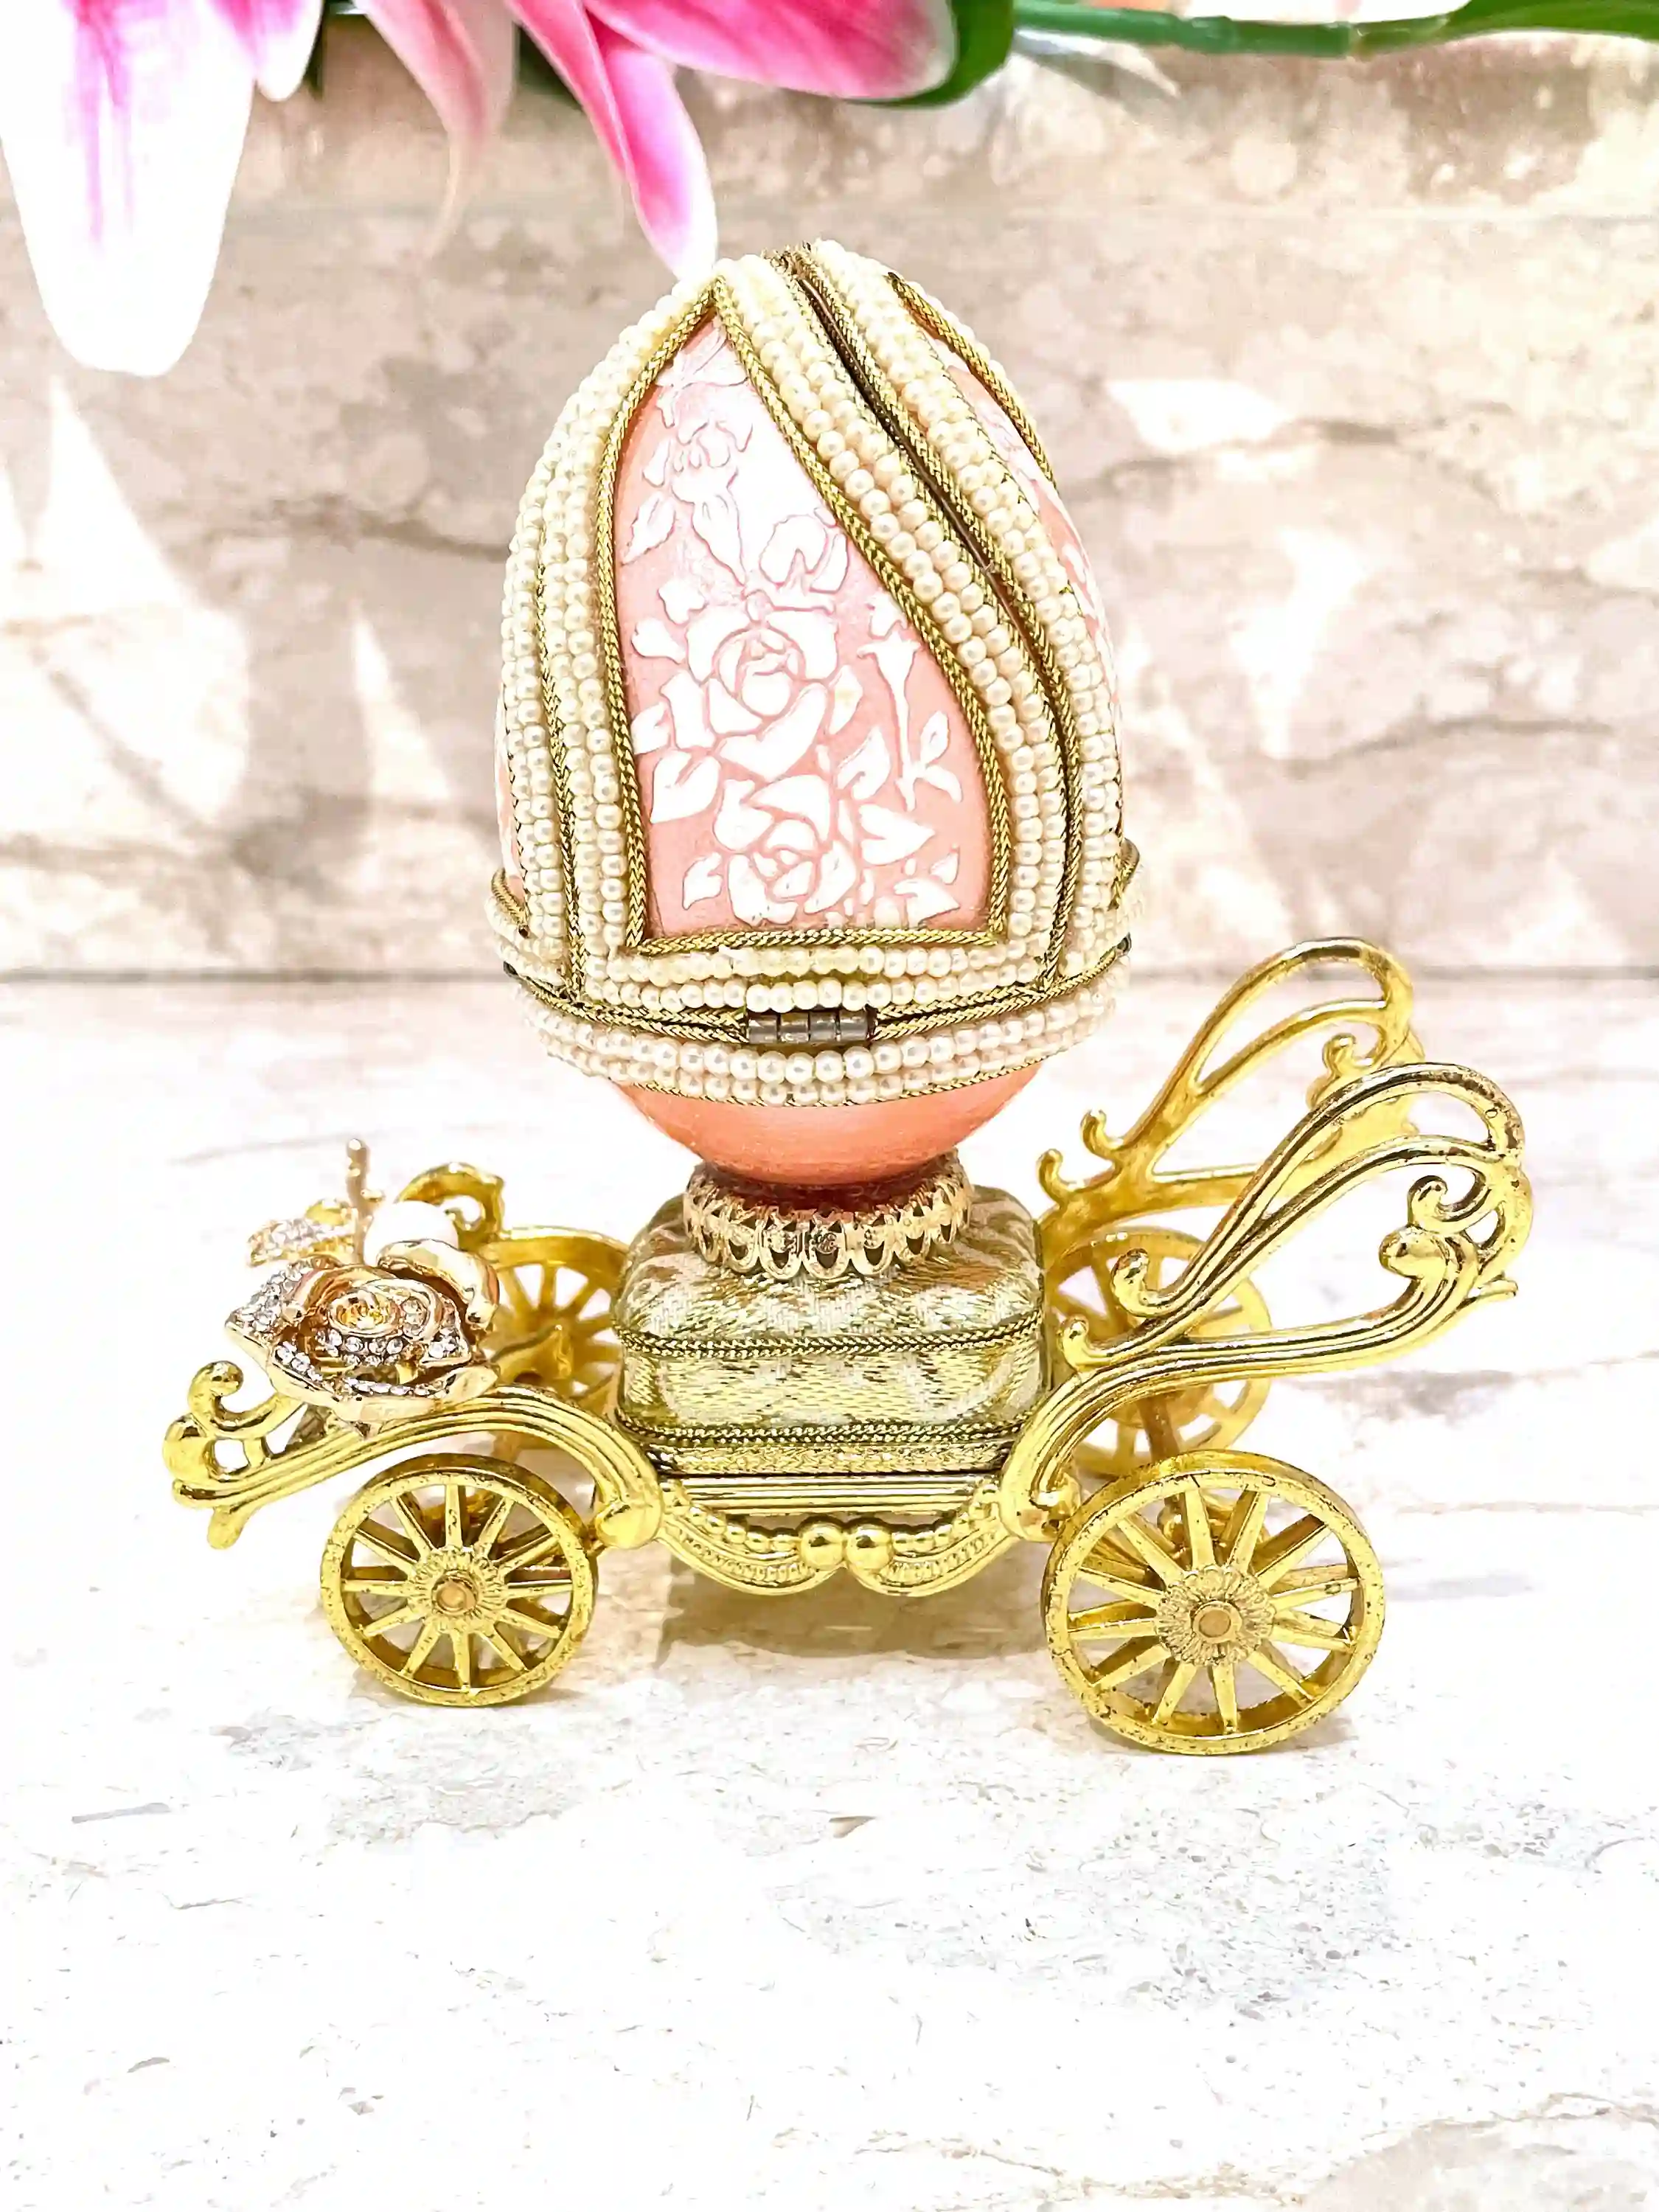 One Ofa Kind Faberge Egg Imperial Egg Antique 1983 Faberge Egg Handcarved Musical Faberge egg Unique gift for wife 40th Birthday Anniversary 